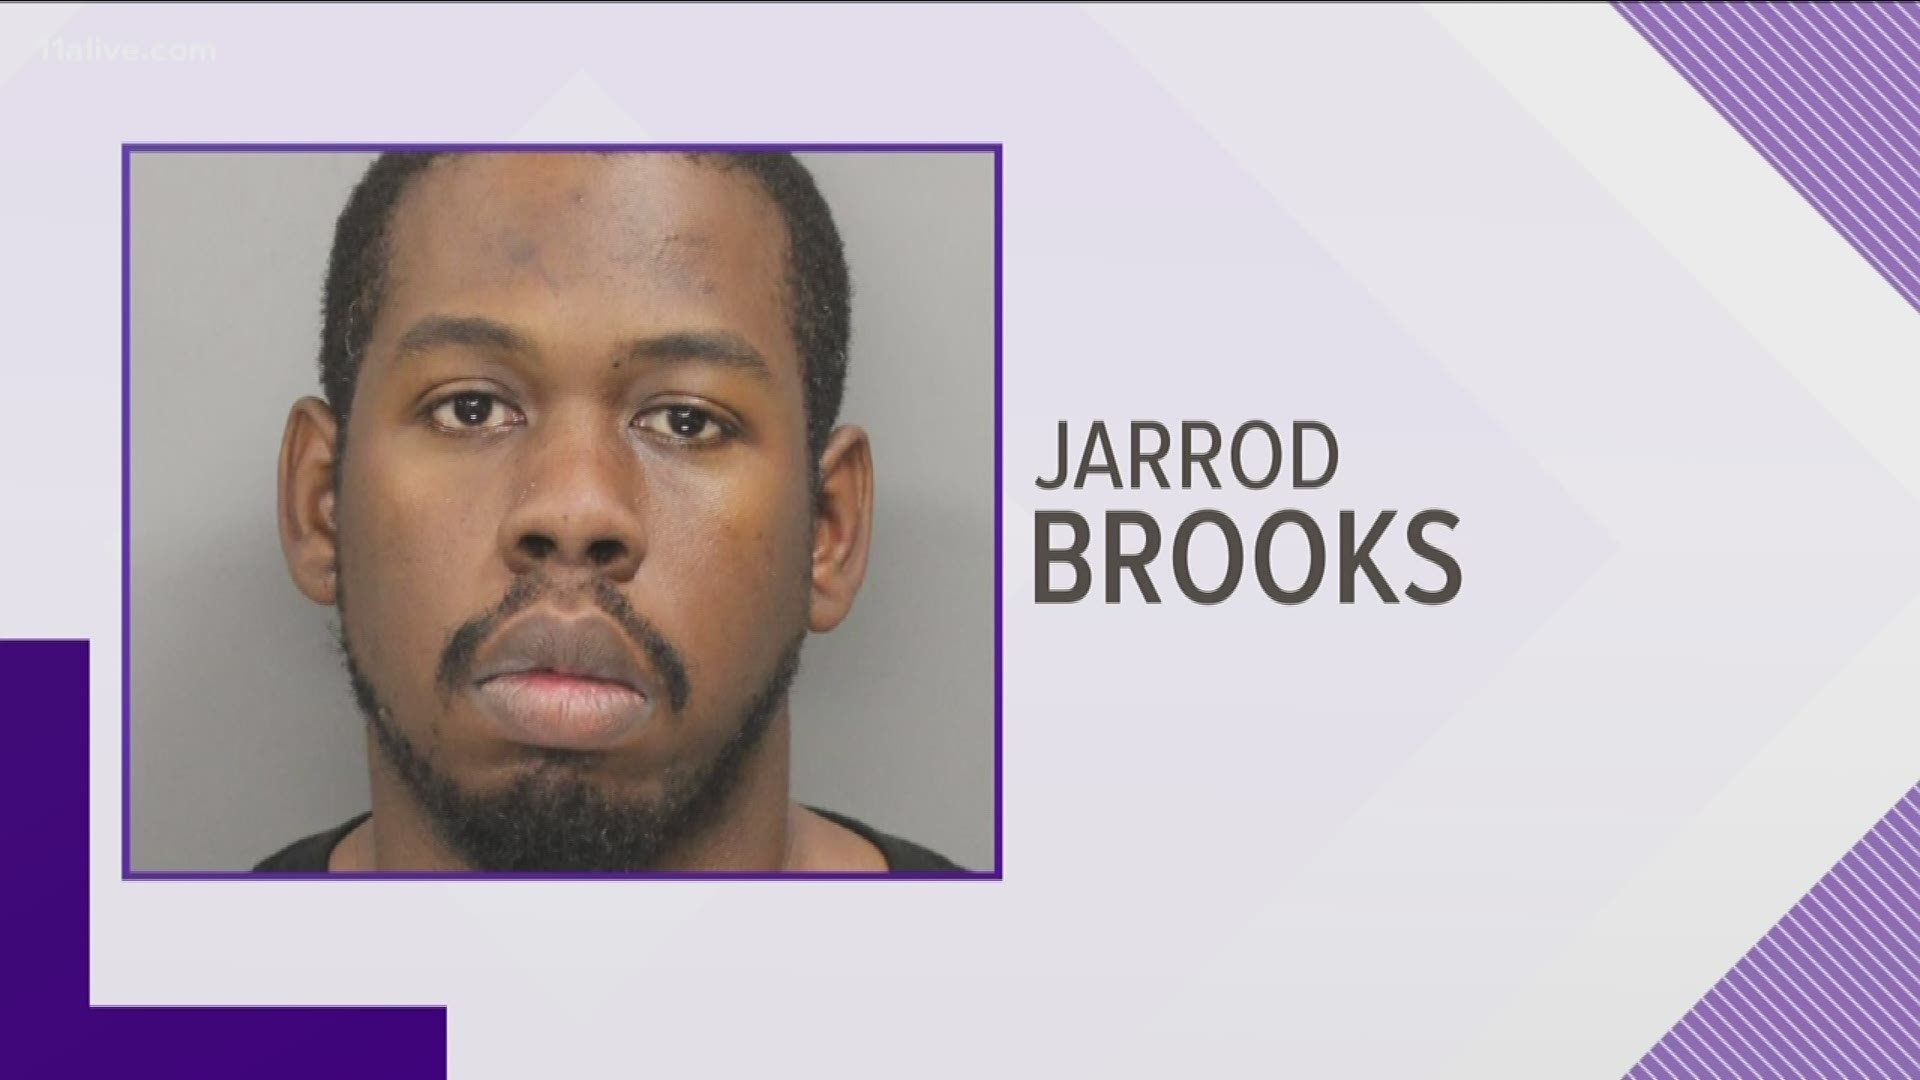 Jarrod Shauntes Brooks, of Smyrna, is accused of sexually abusing a child under the age of 16.